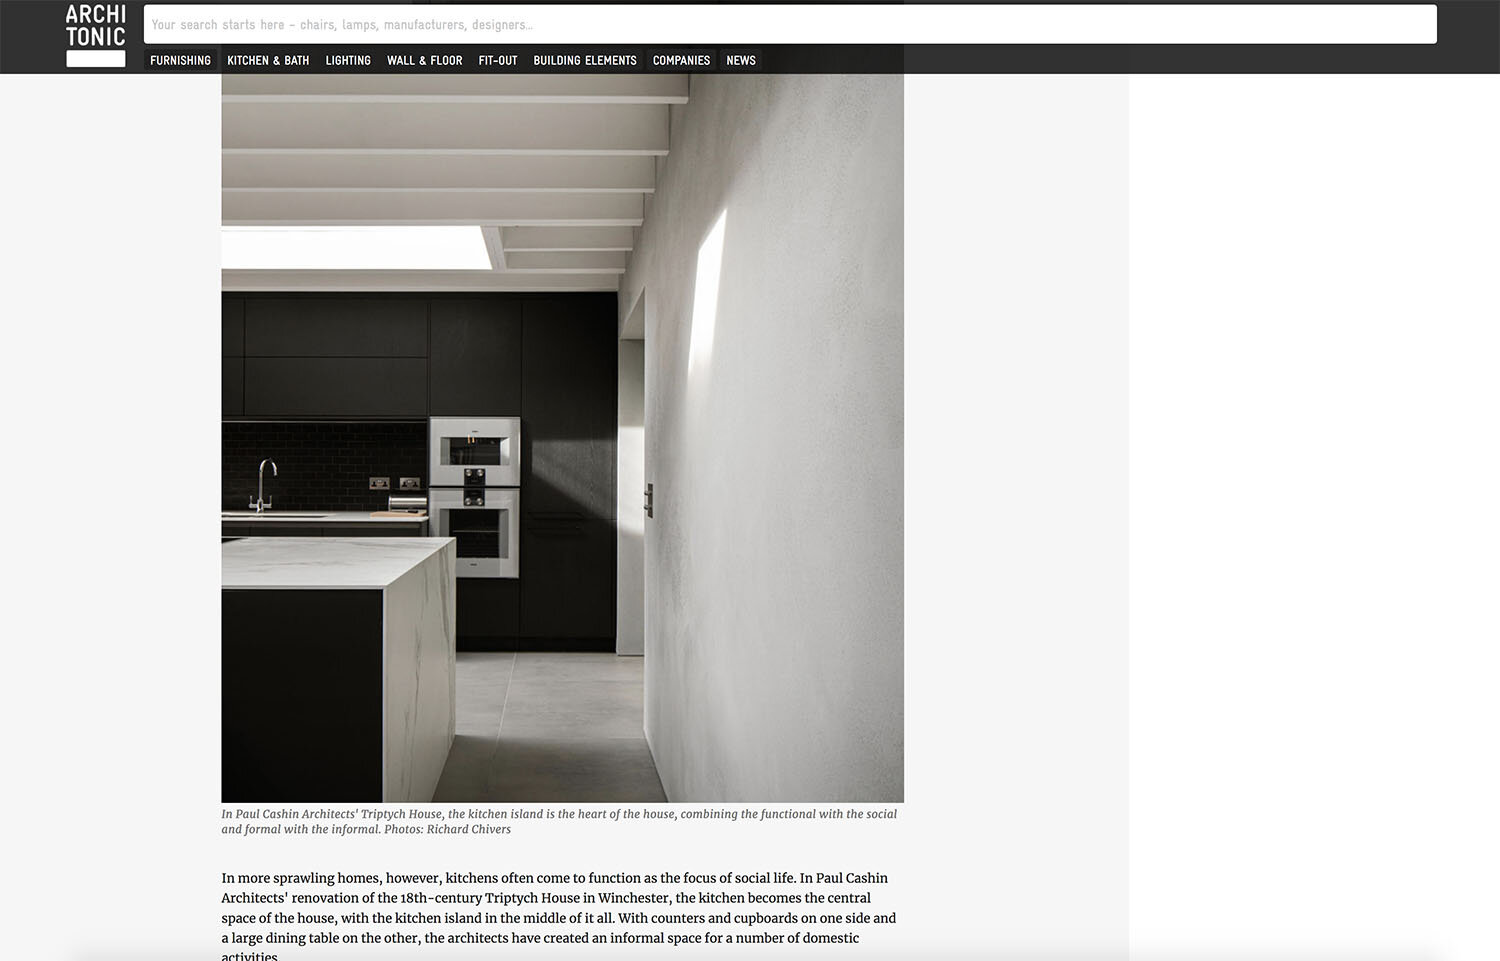 03.20 Triptych House featured on Architonic